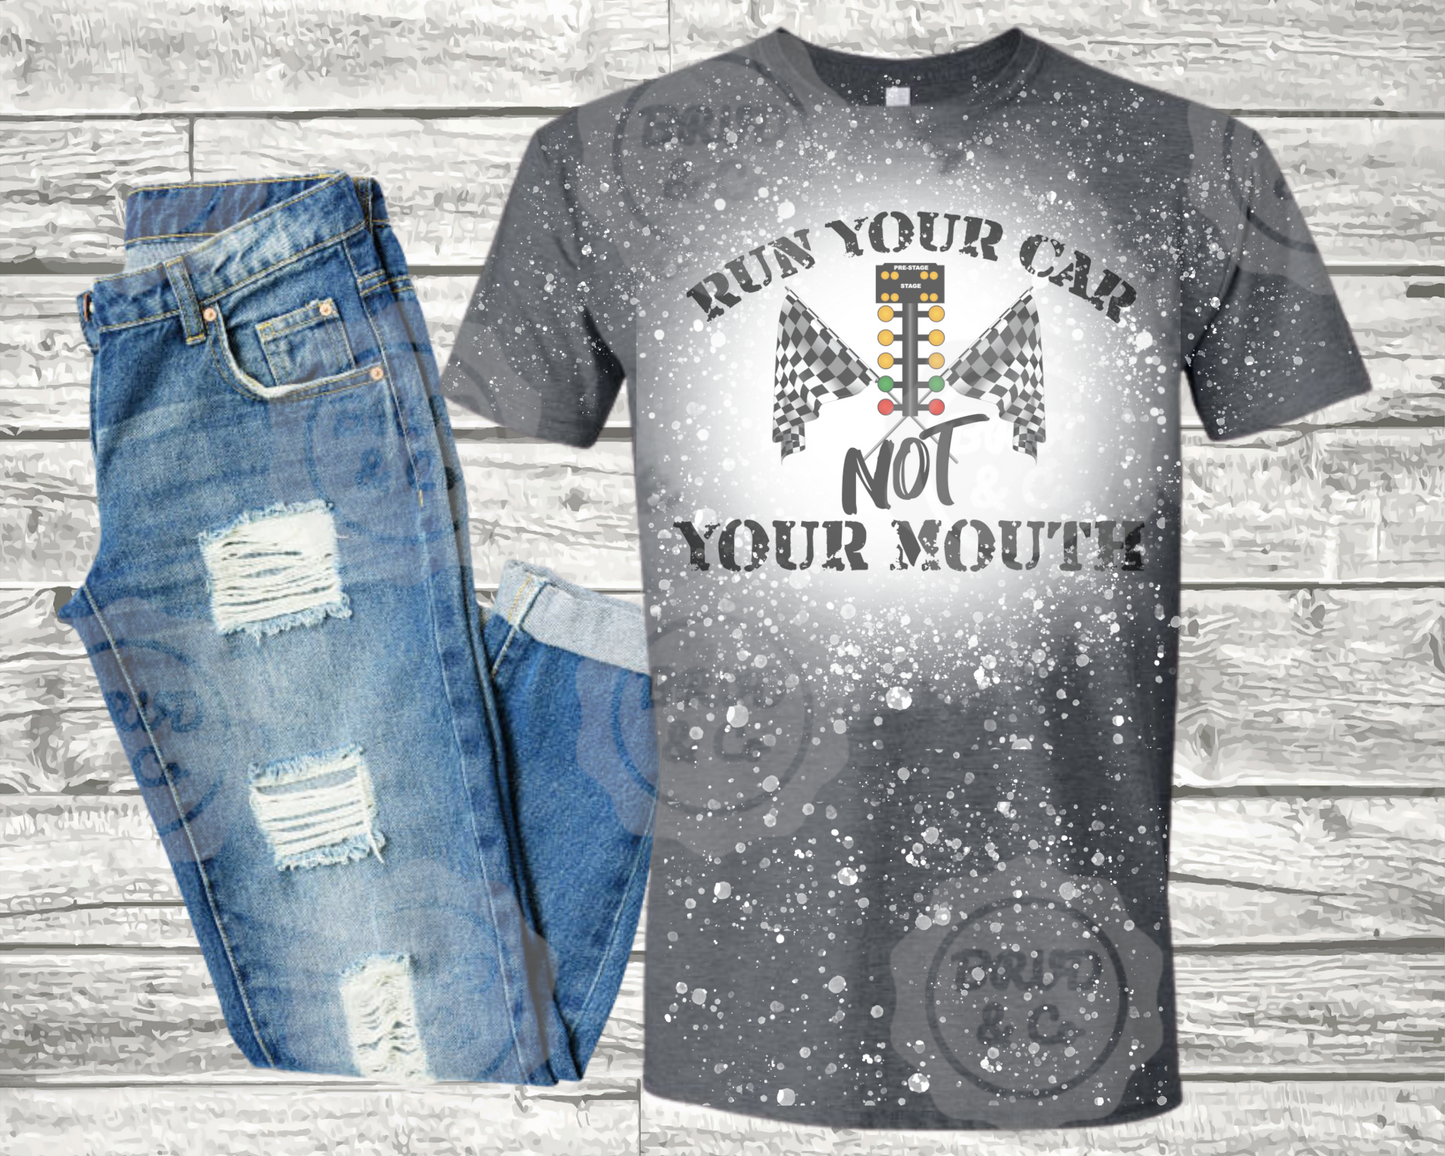 "Run your car not your mouth" Bleached T-Shirt